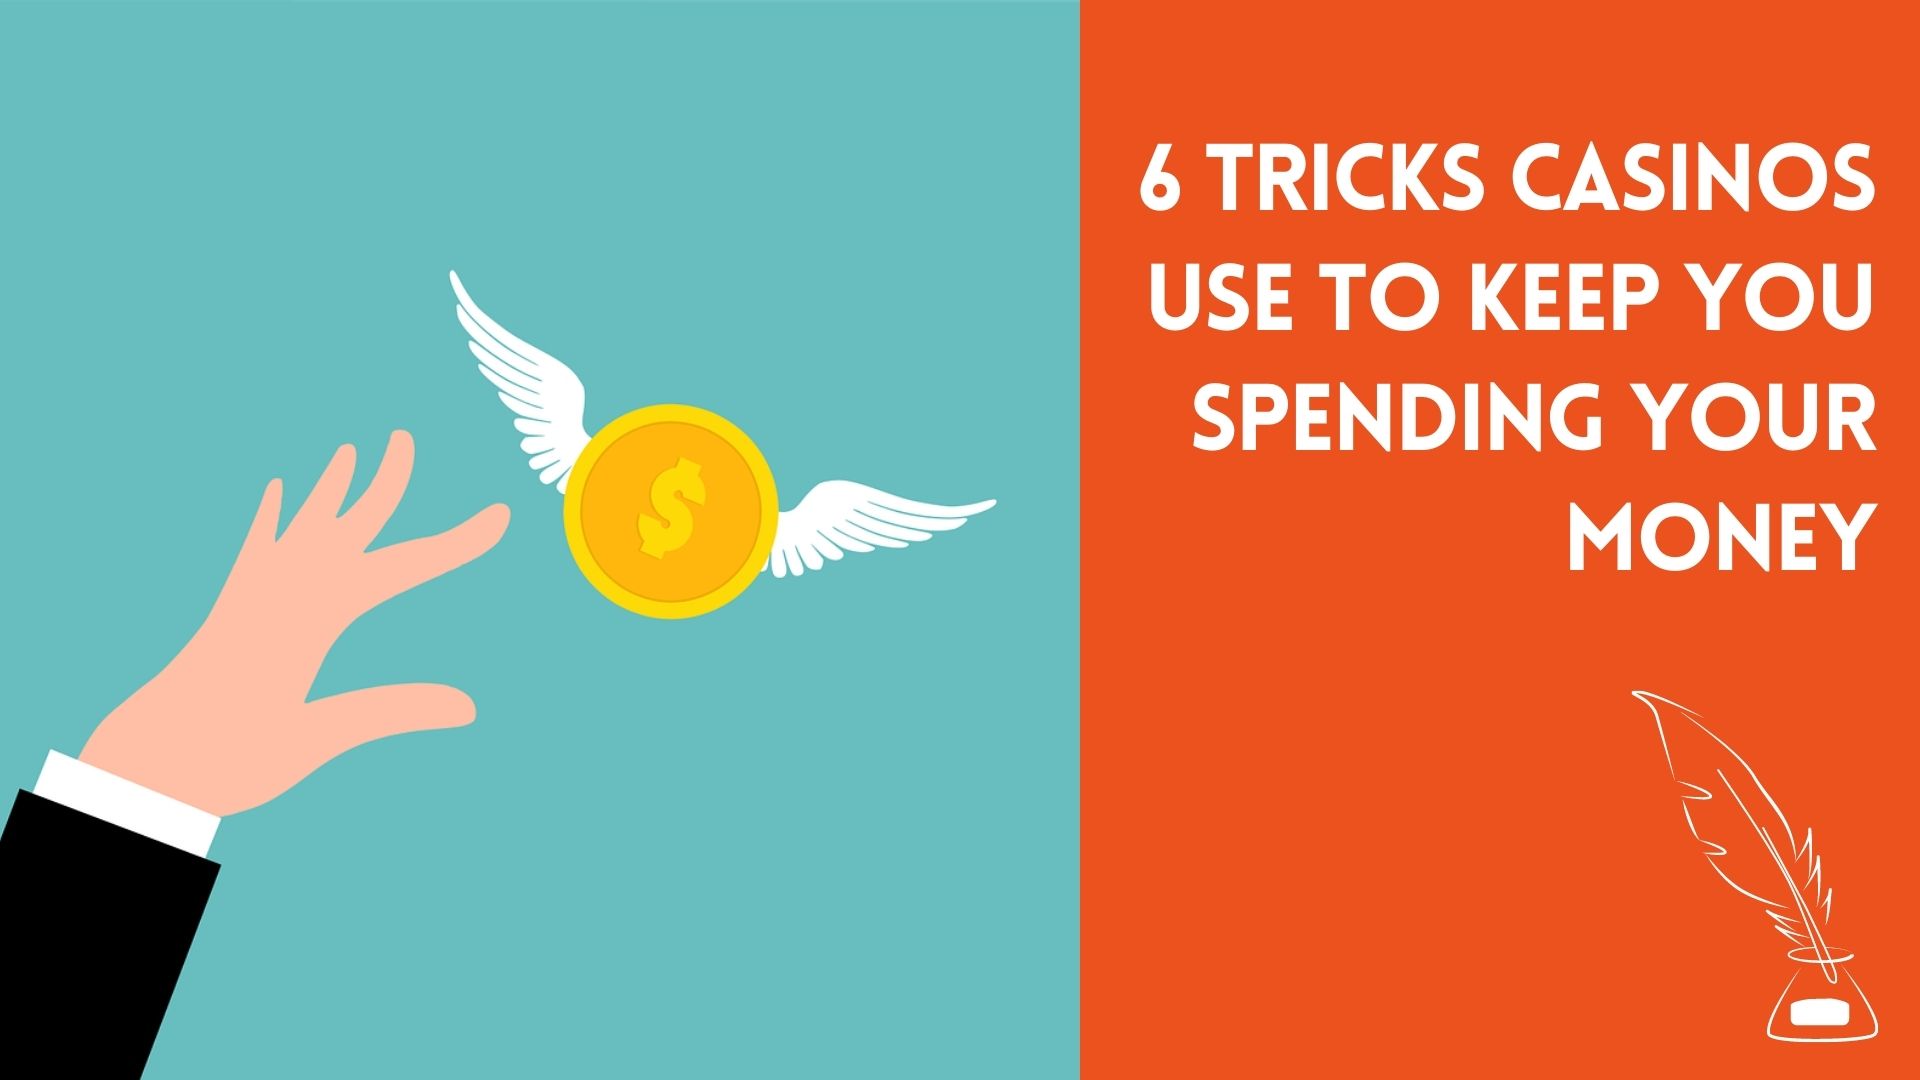 6 Tricks Casinos Use to Keep You Spending Your Money